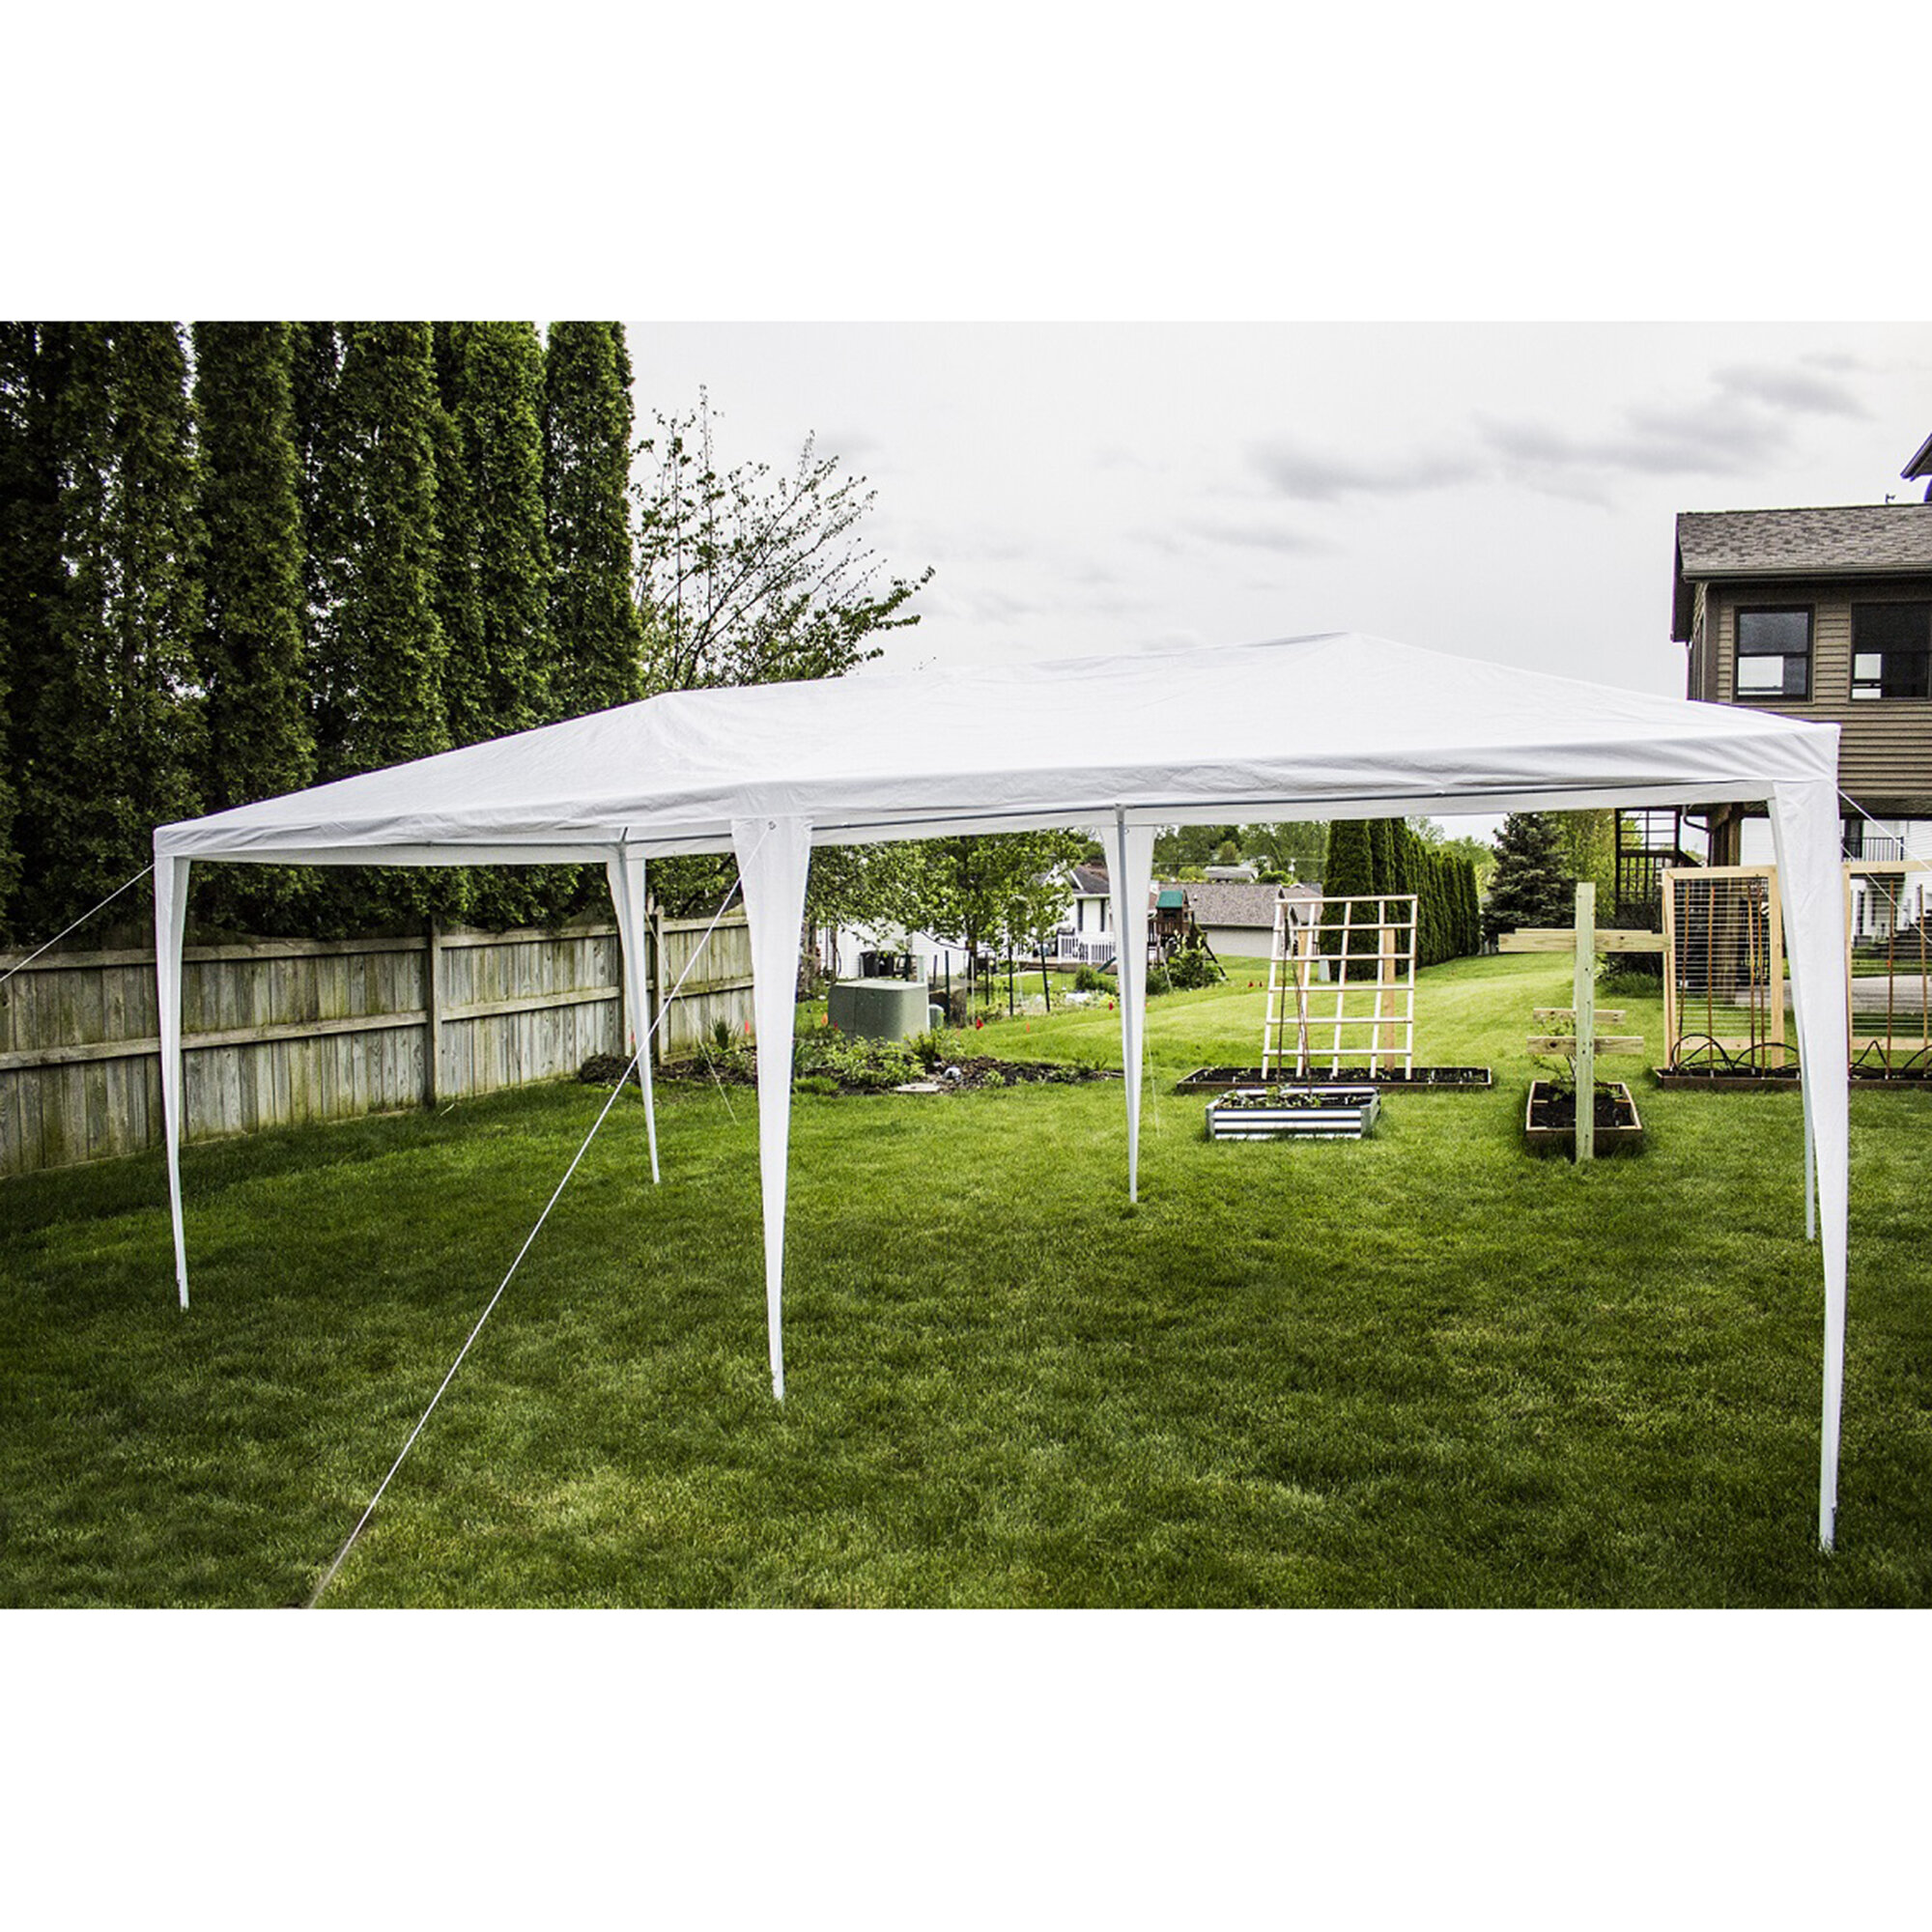 Heavy Duty Gazebo Pavilion for Party Wedding Events BBQ Yaheetech 10 X 20 Outdoor Easy Pop up Canopy